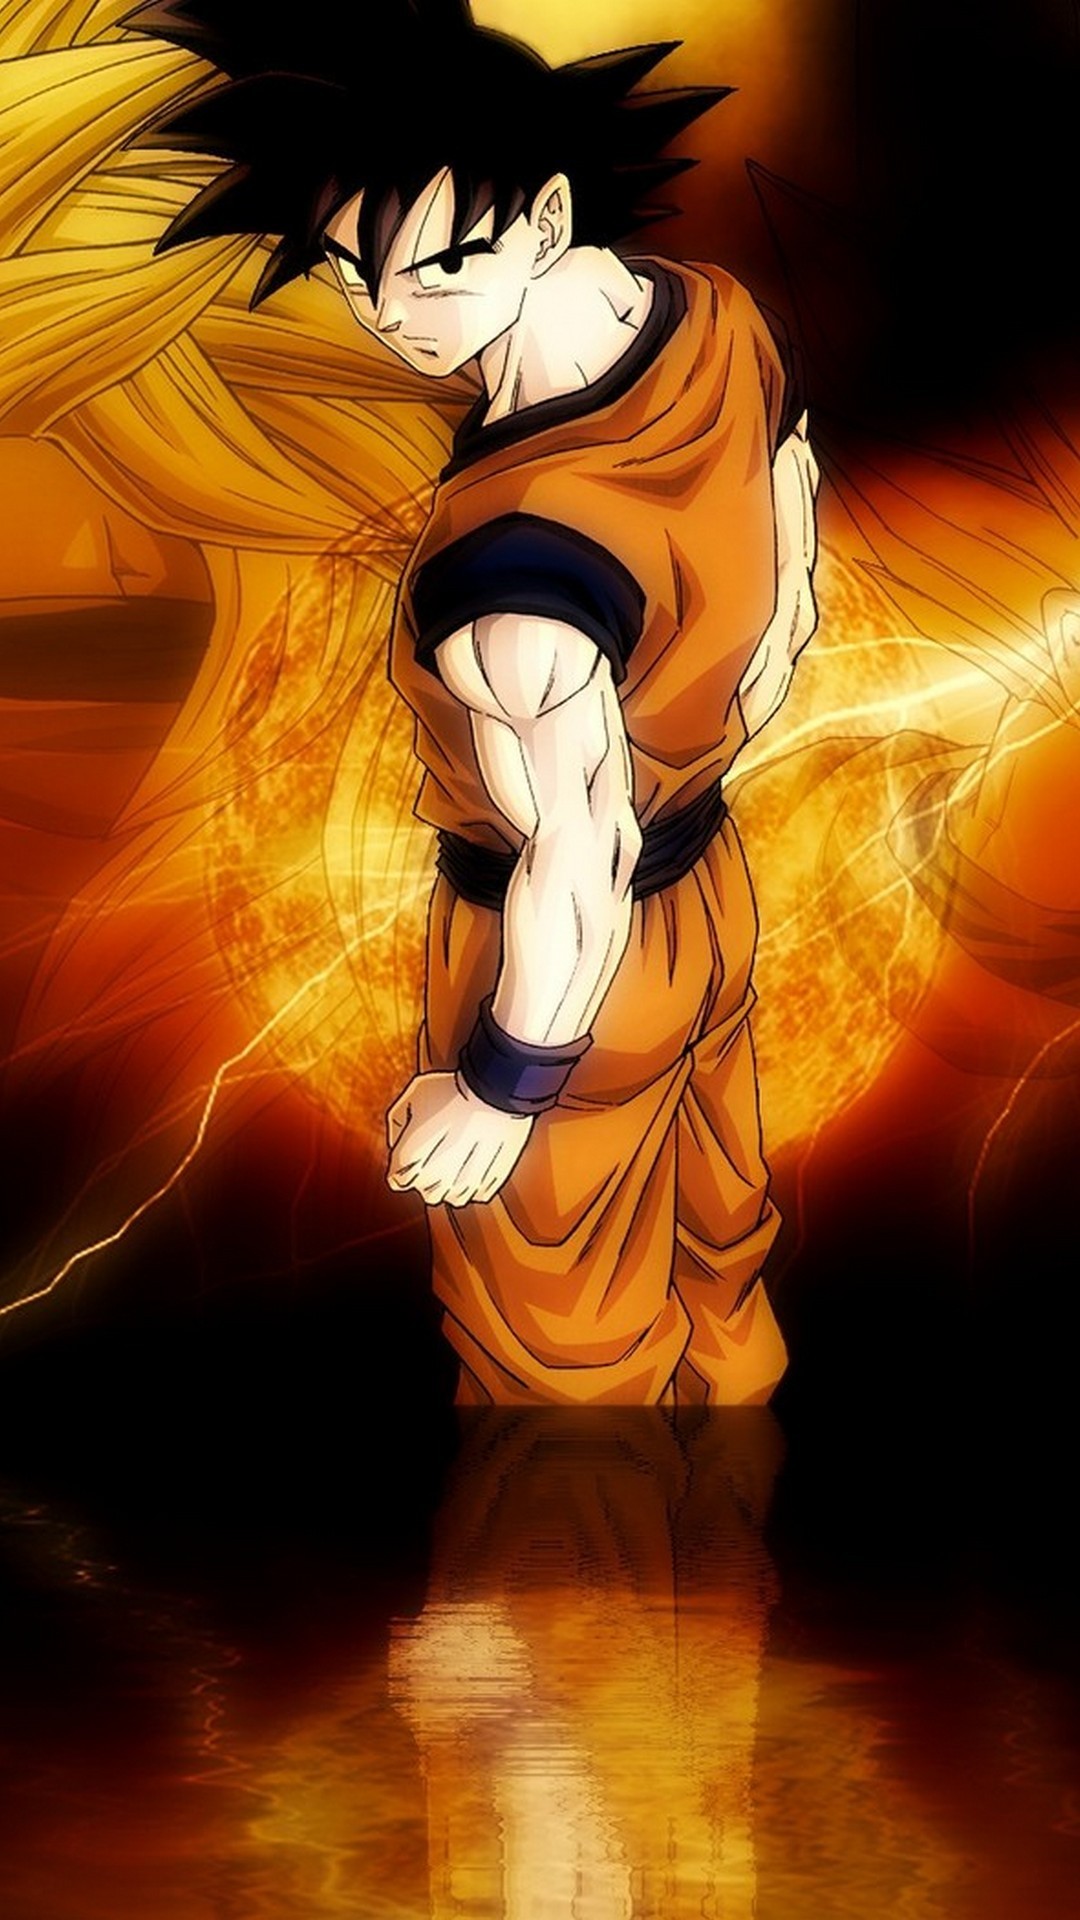 Goku Images Wallpaper For Android with HD resolution 1080x1920